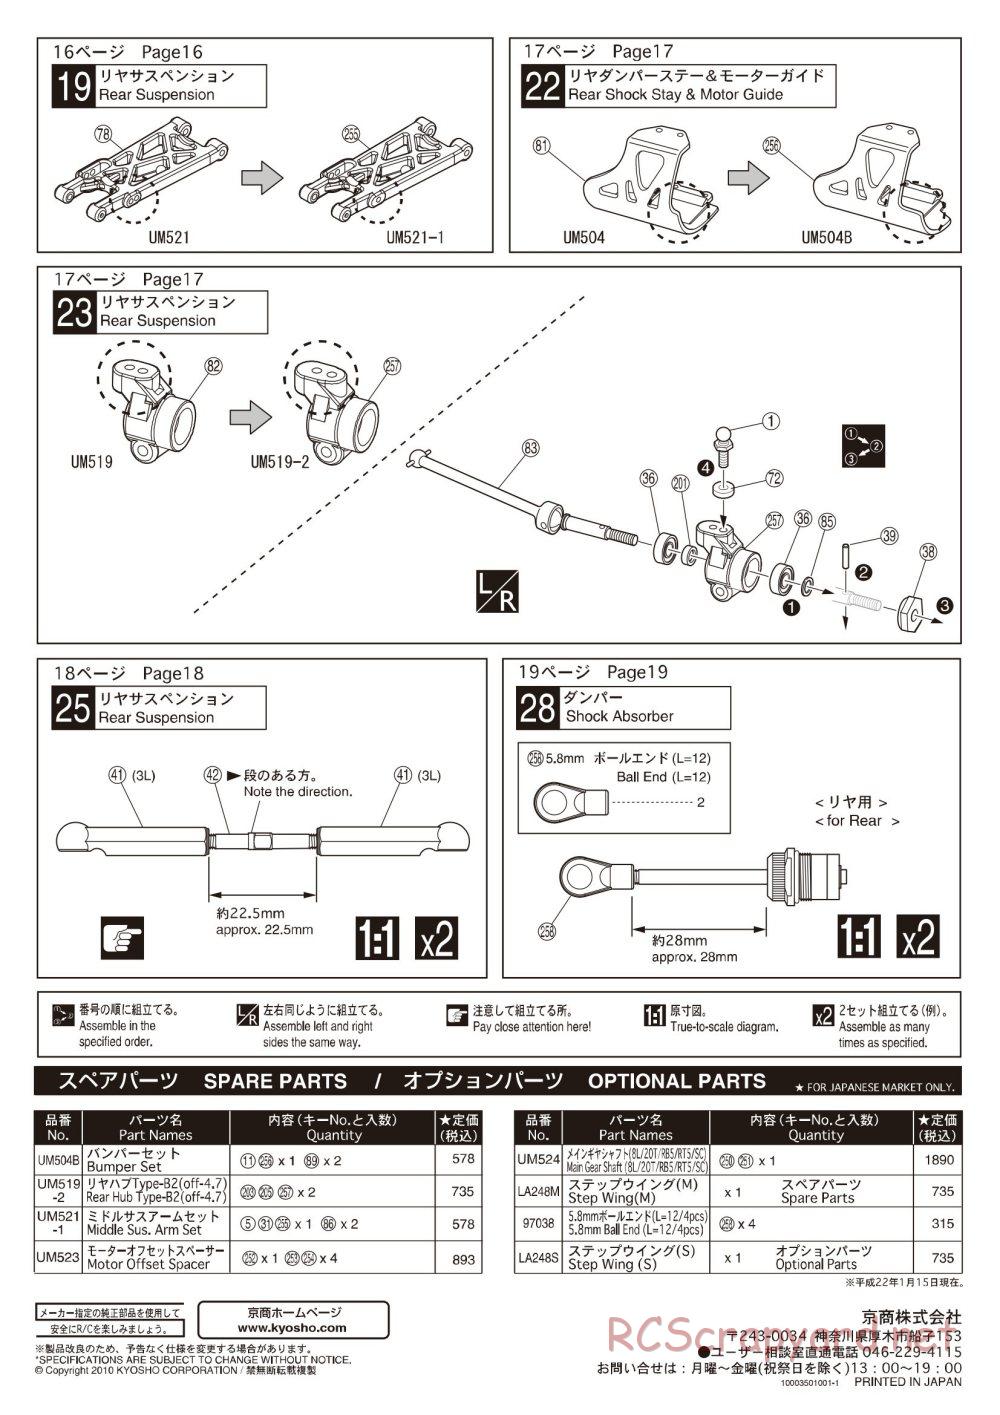 Kyosho - Ultima RB5 SP2 - Manual - Page 2